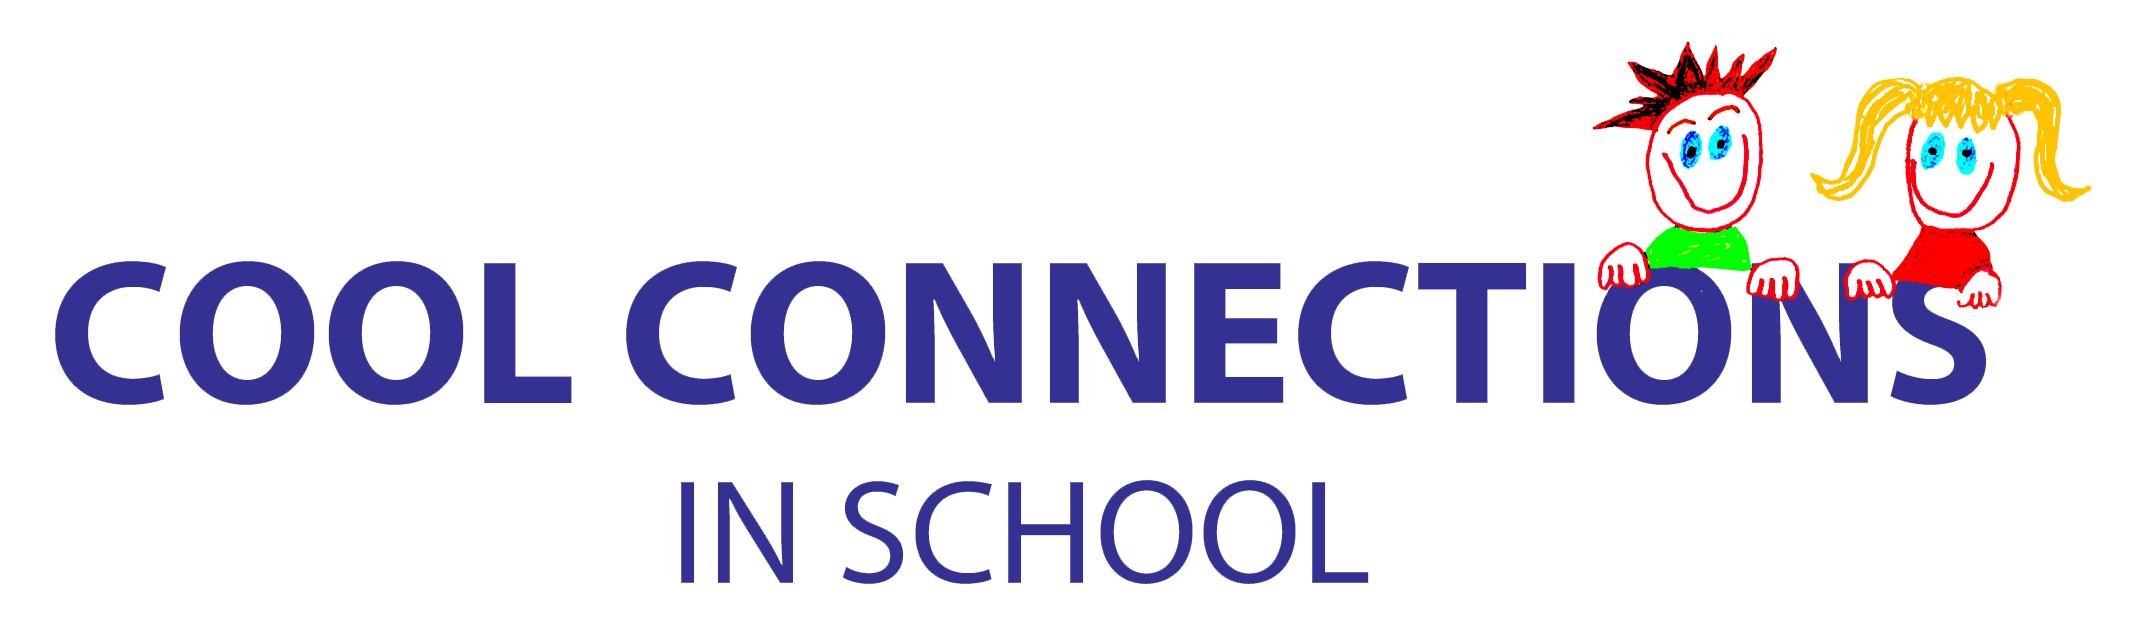 Cool Connections in School logo